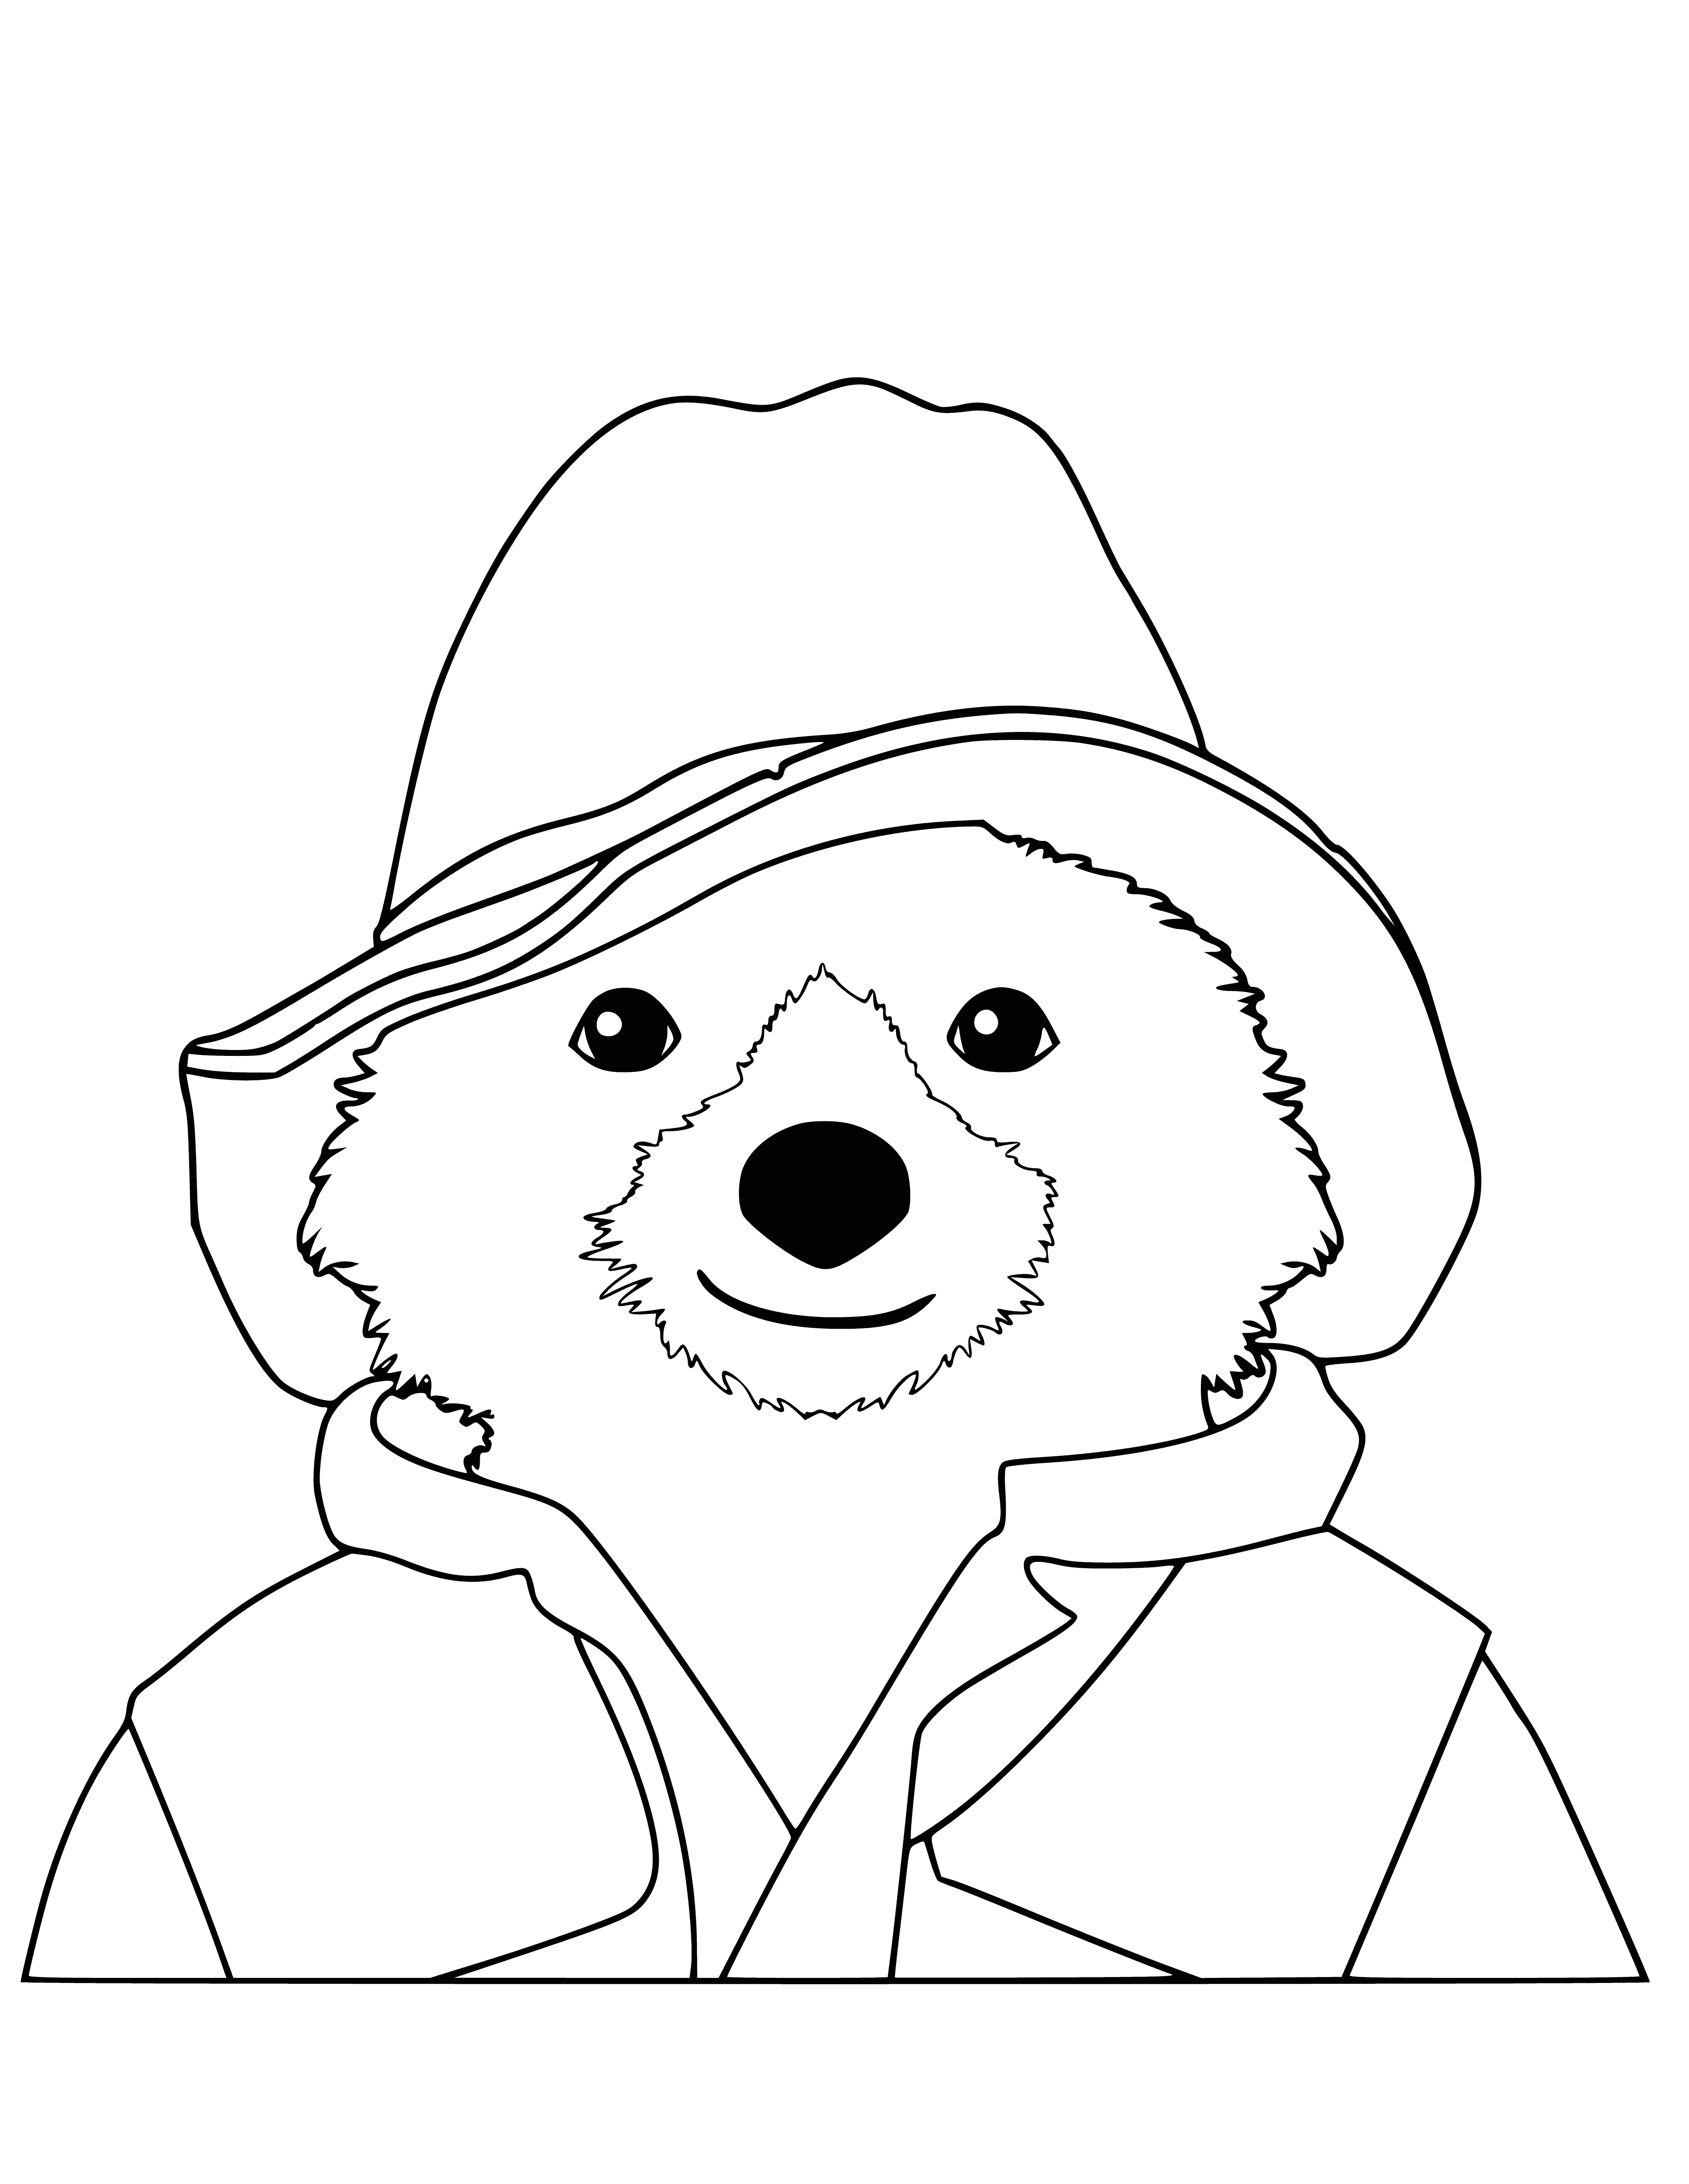 coloring page: Older gent. waits at train sta. with large suitcase & a small brown bear wearing red scarf around its neck.